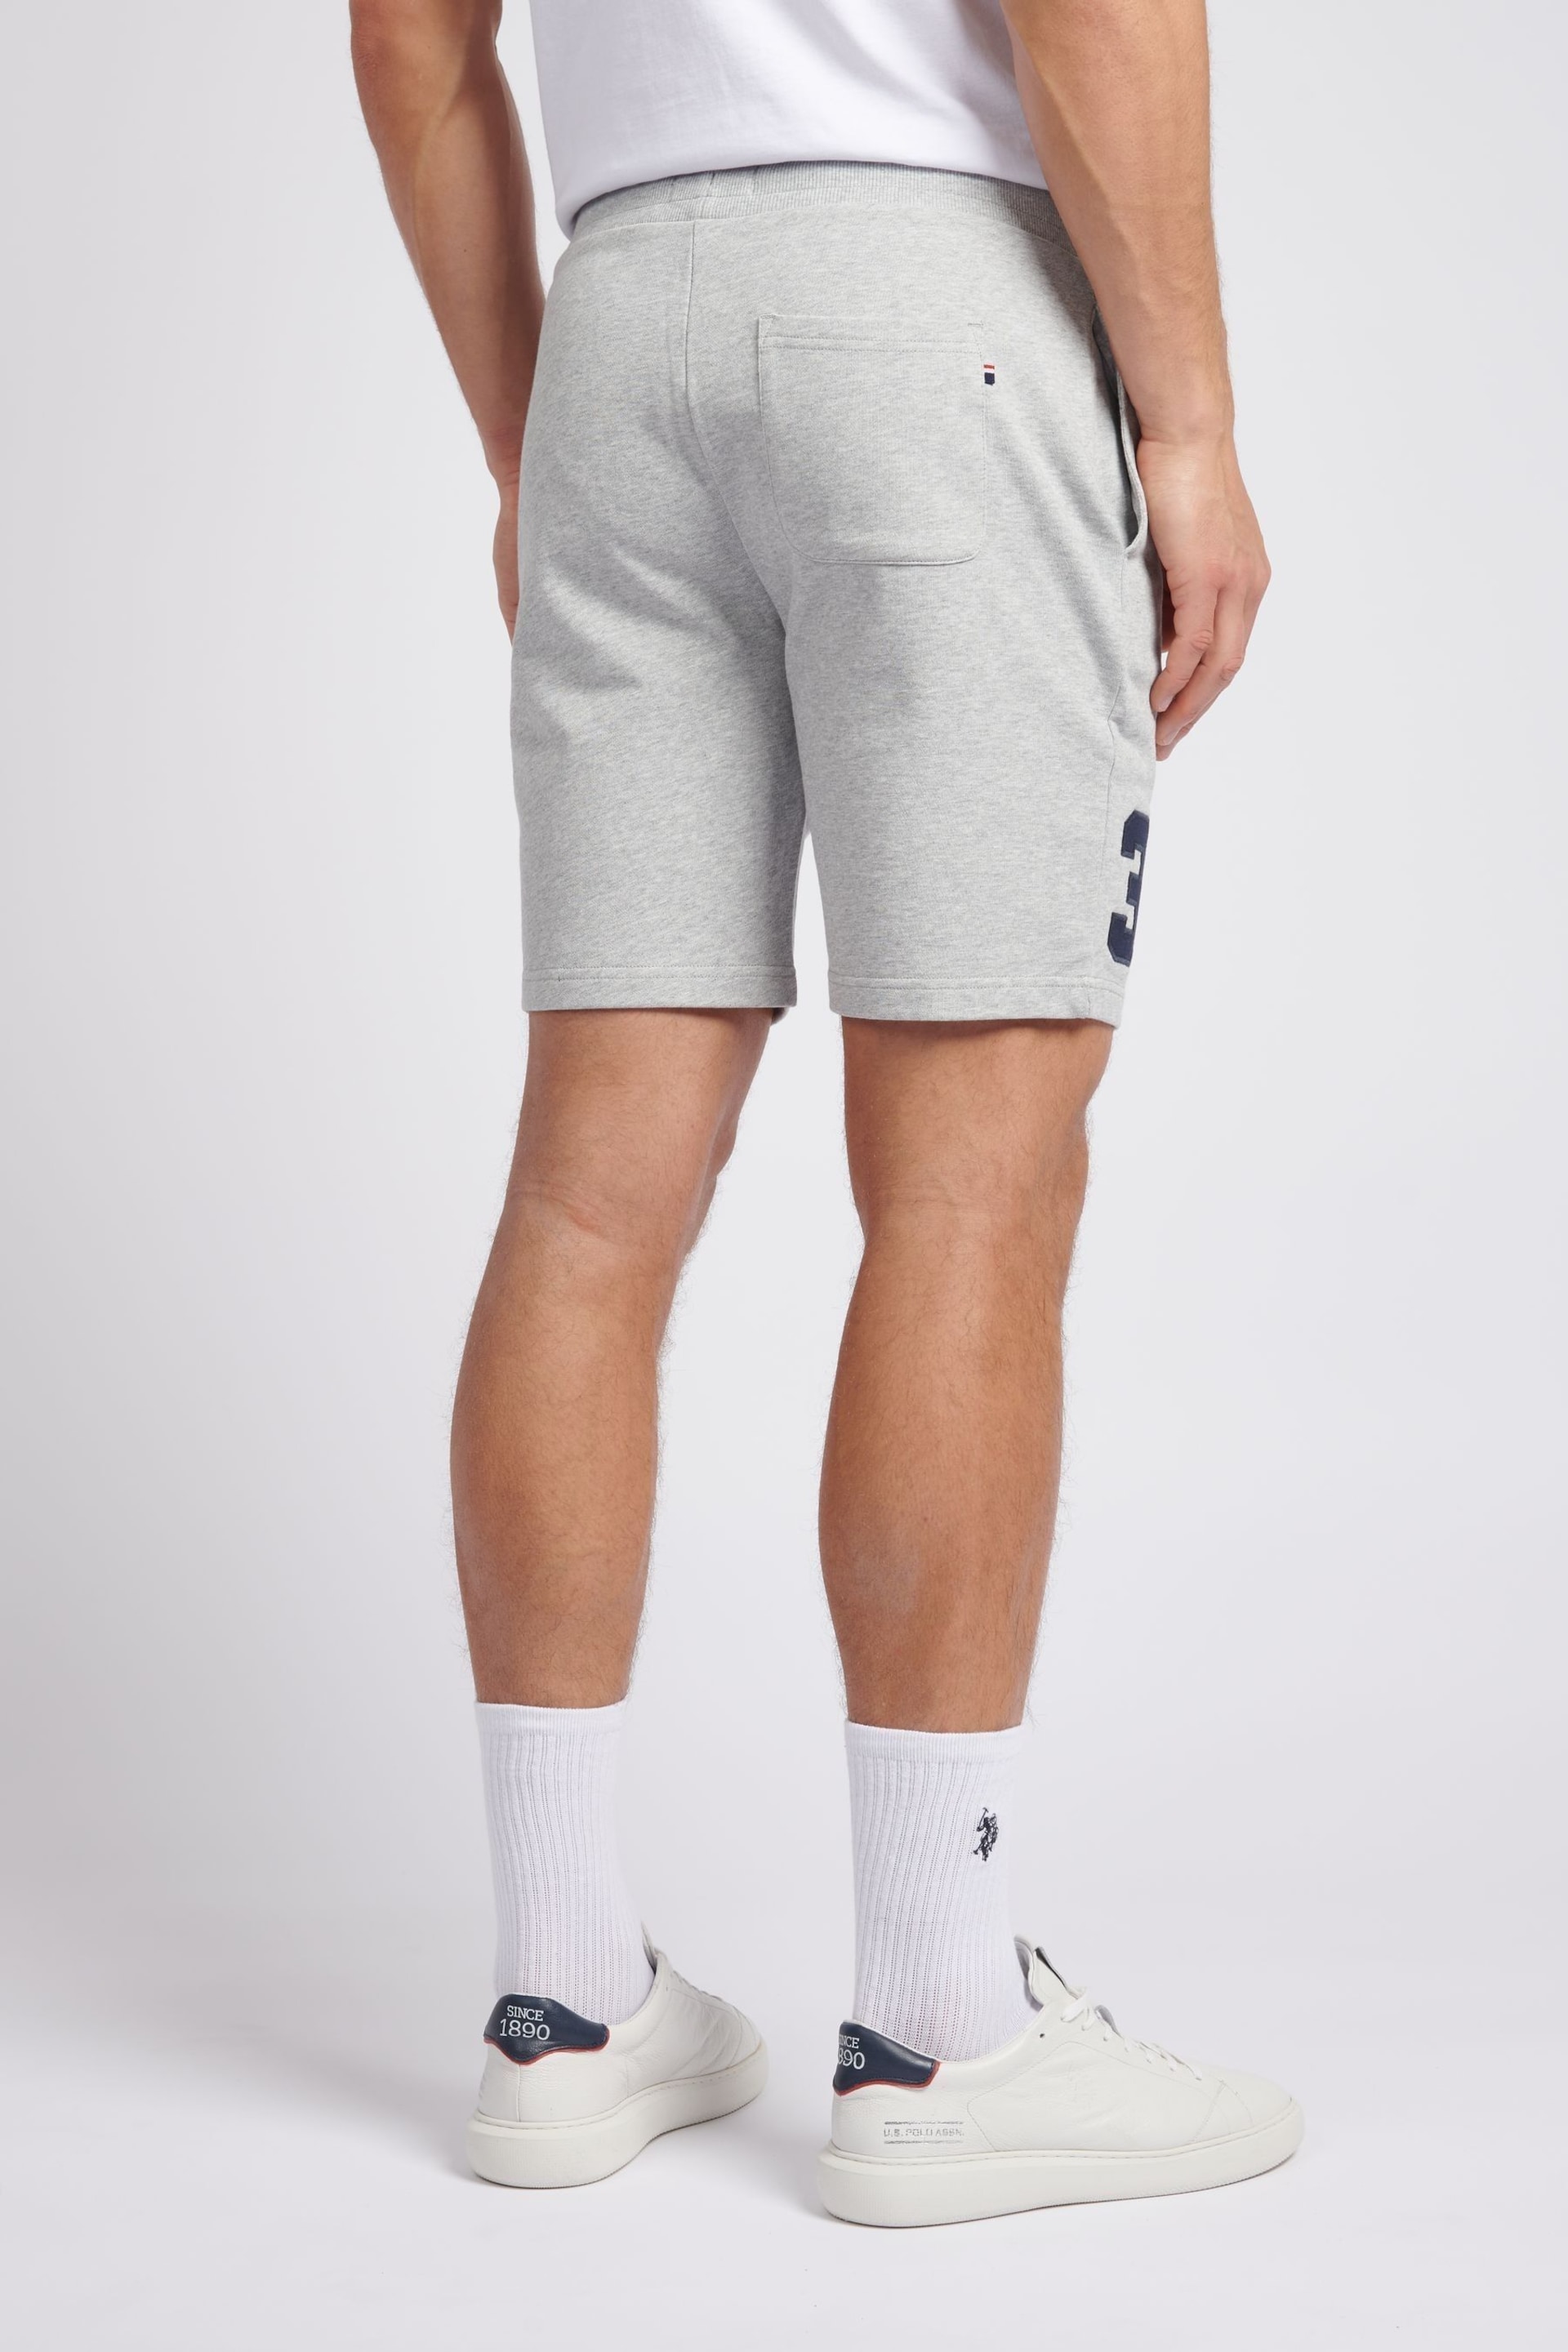 U.S. Polo Assn. Mens Classic Fit Player 3 Sweat Shorts - Image 4 of 9